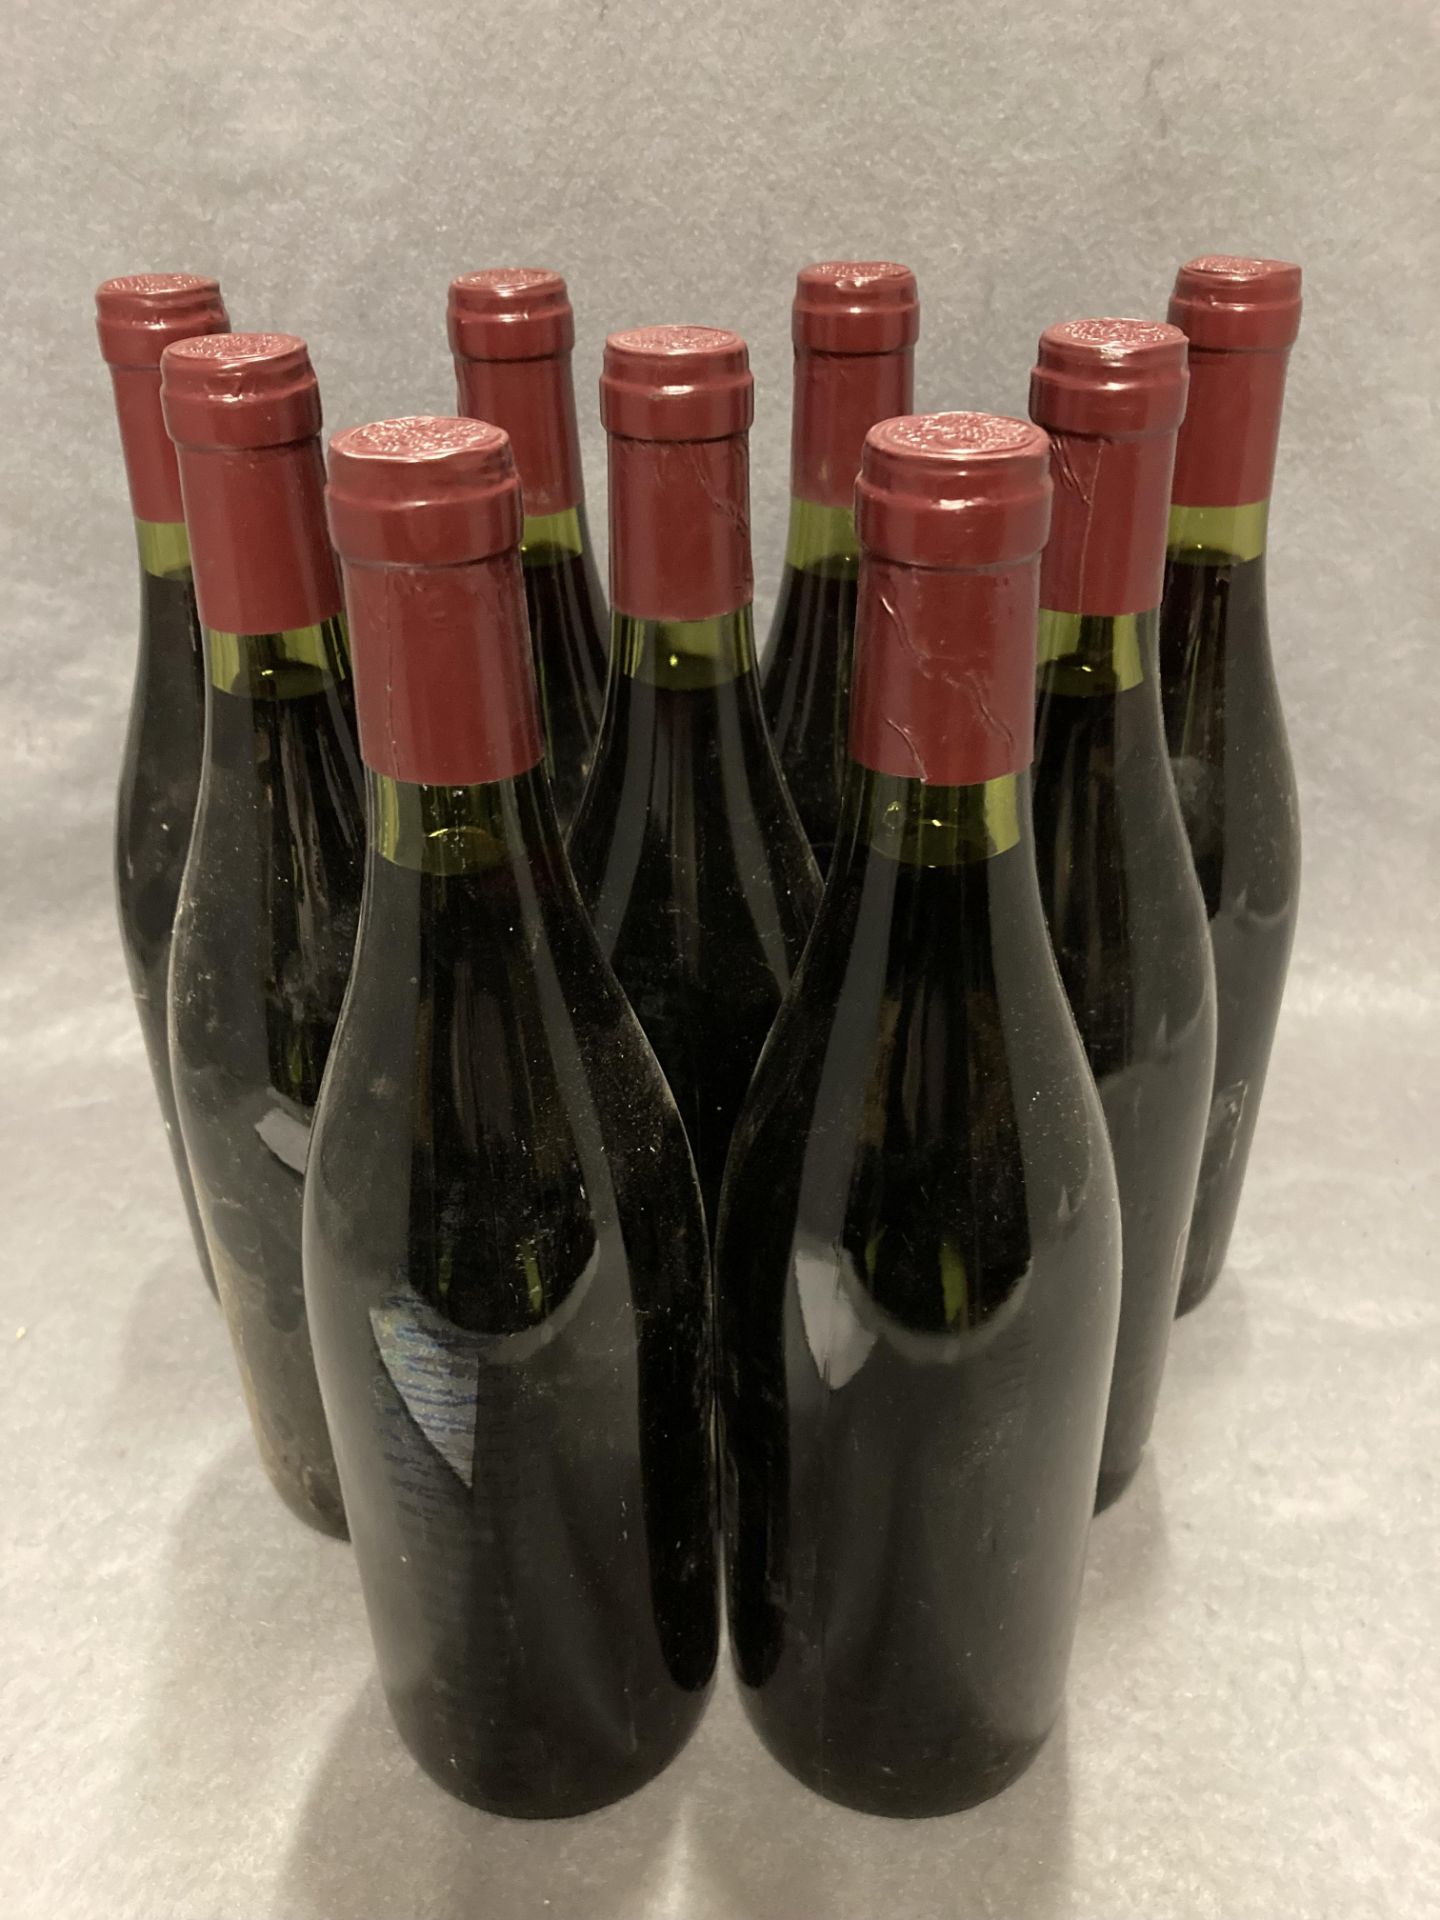 Nine bottles of 75cl red table wine believed to be I.E. - Image 2 of 2